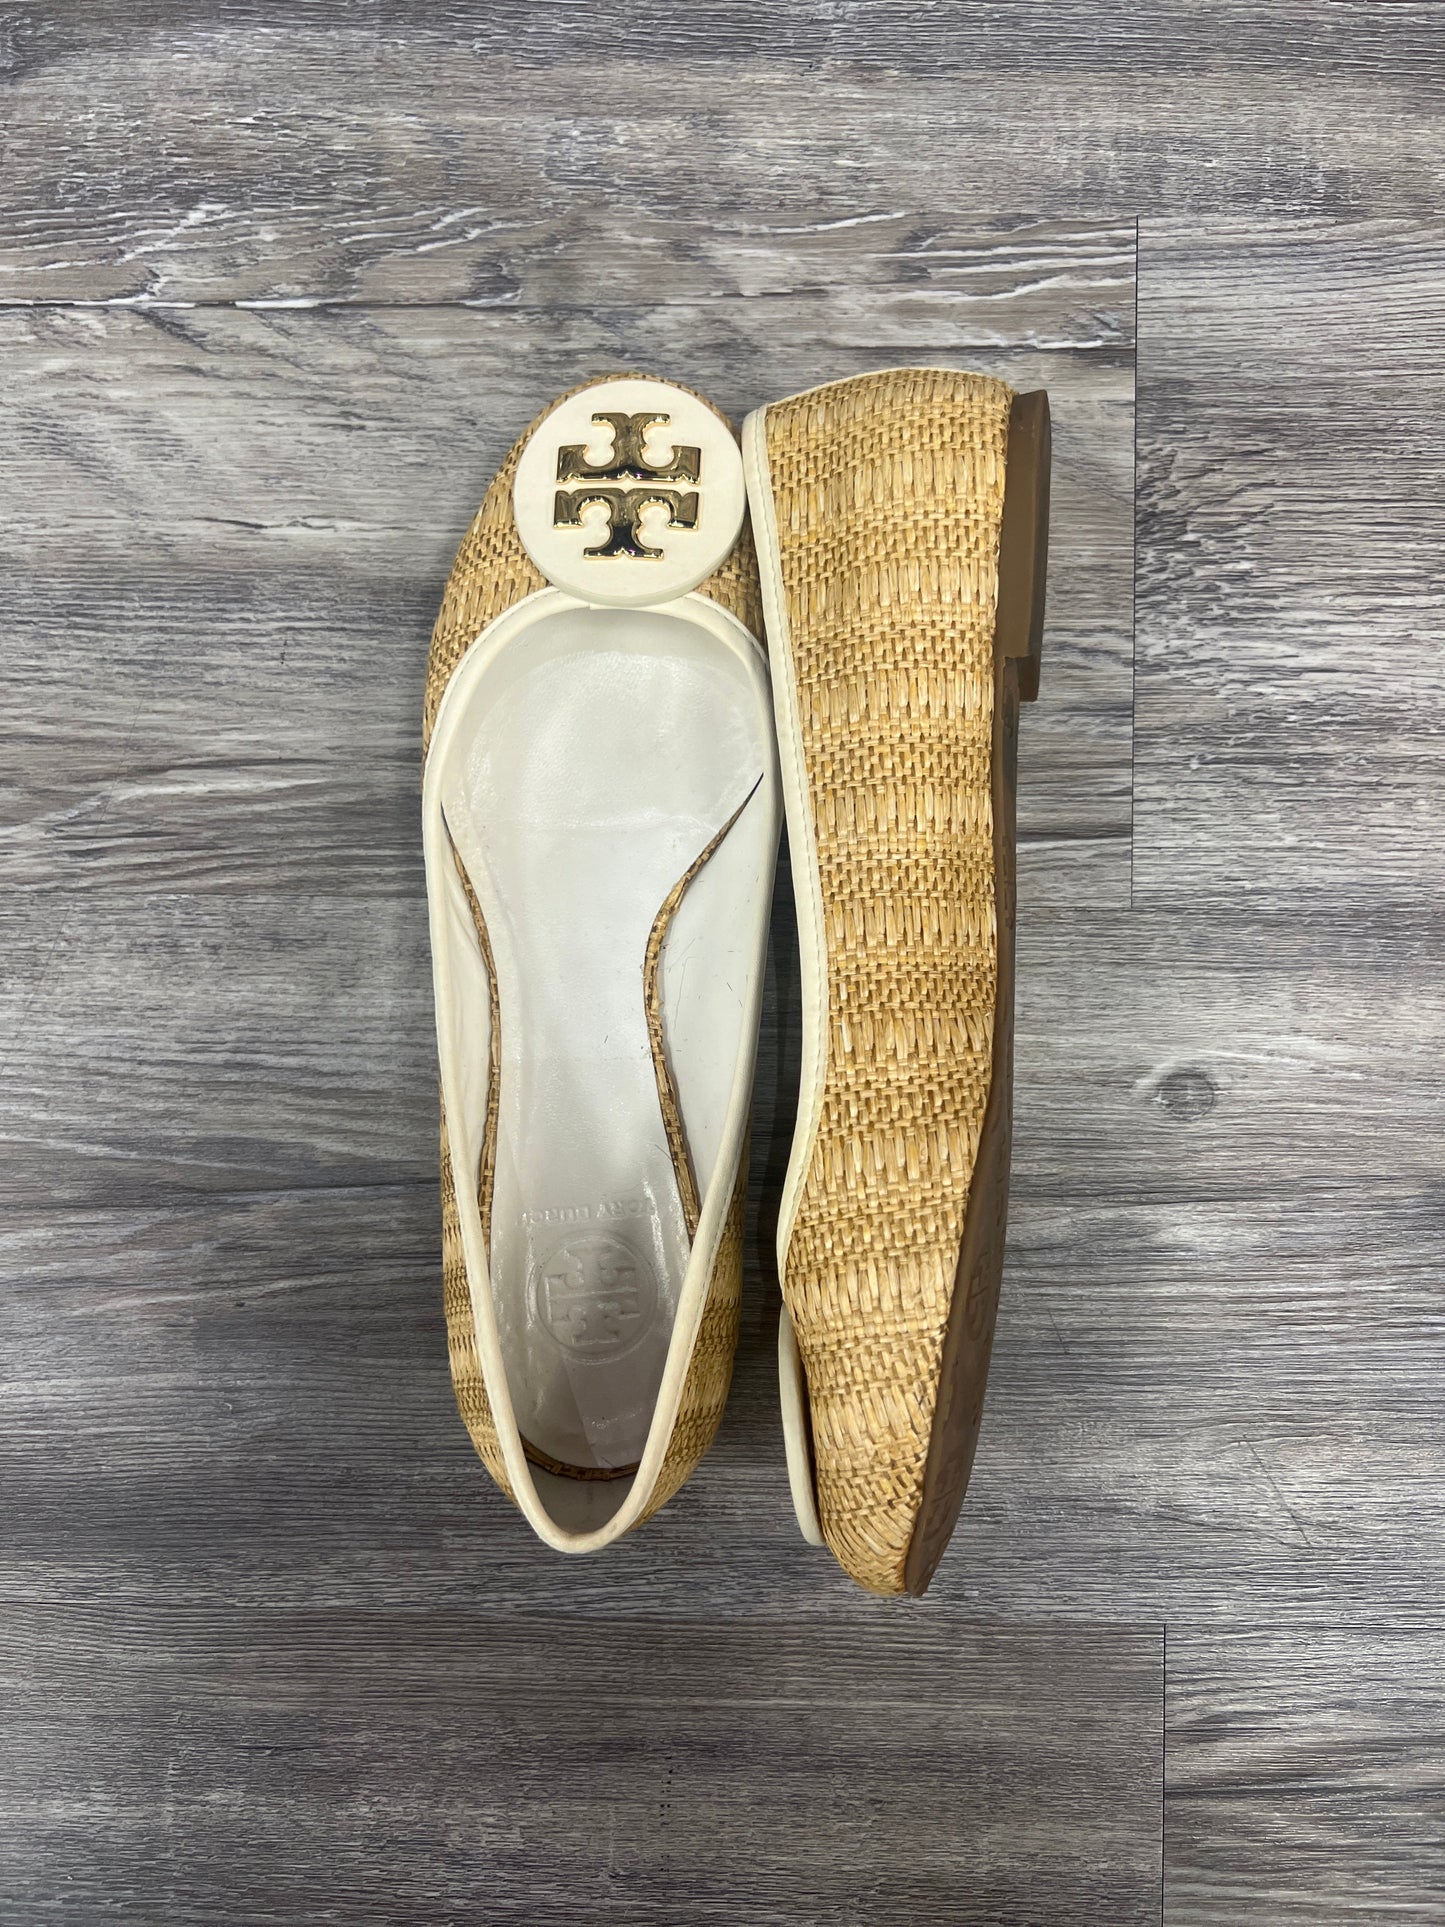 Sandals Designer By Tory Burch  Size: 10.5